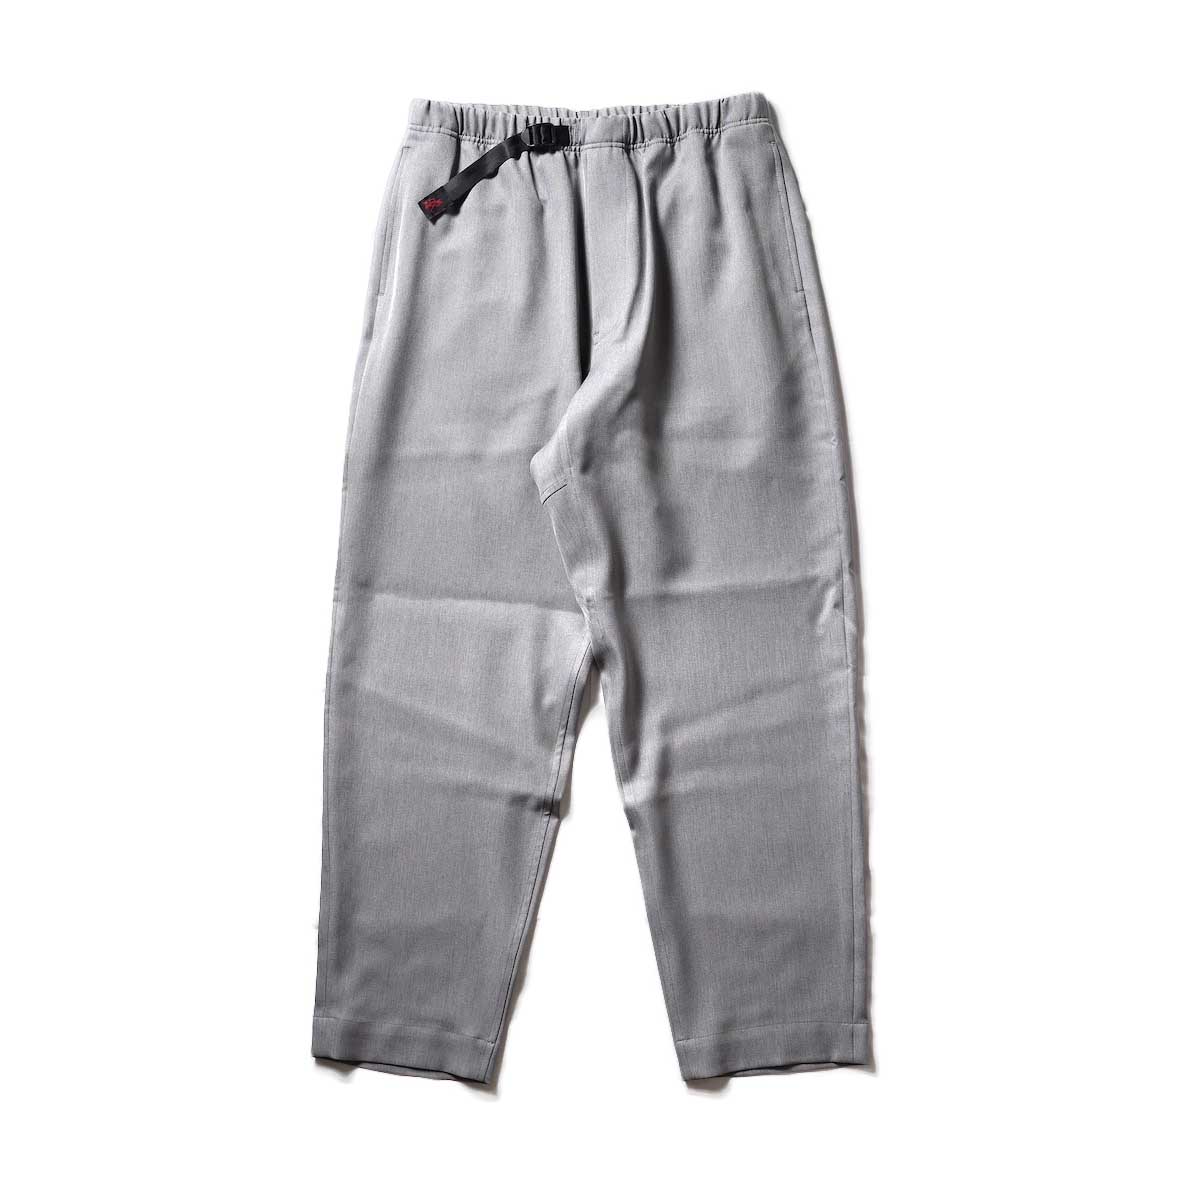 N.HOOLYWOOD / 2222-PT27-019 N.HOOLYWOOD COMPILE × ×GRAMICCI TROUSERS (Gray)